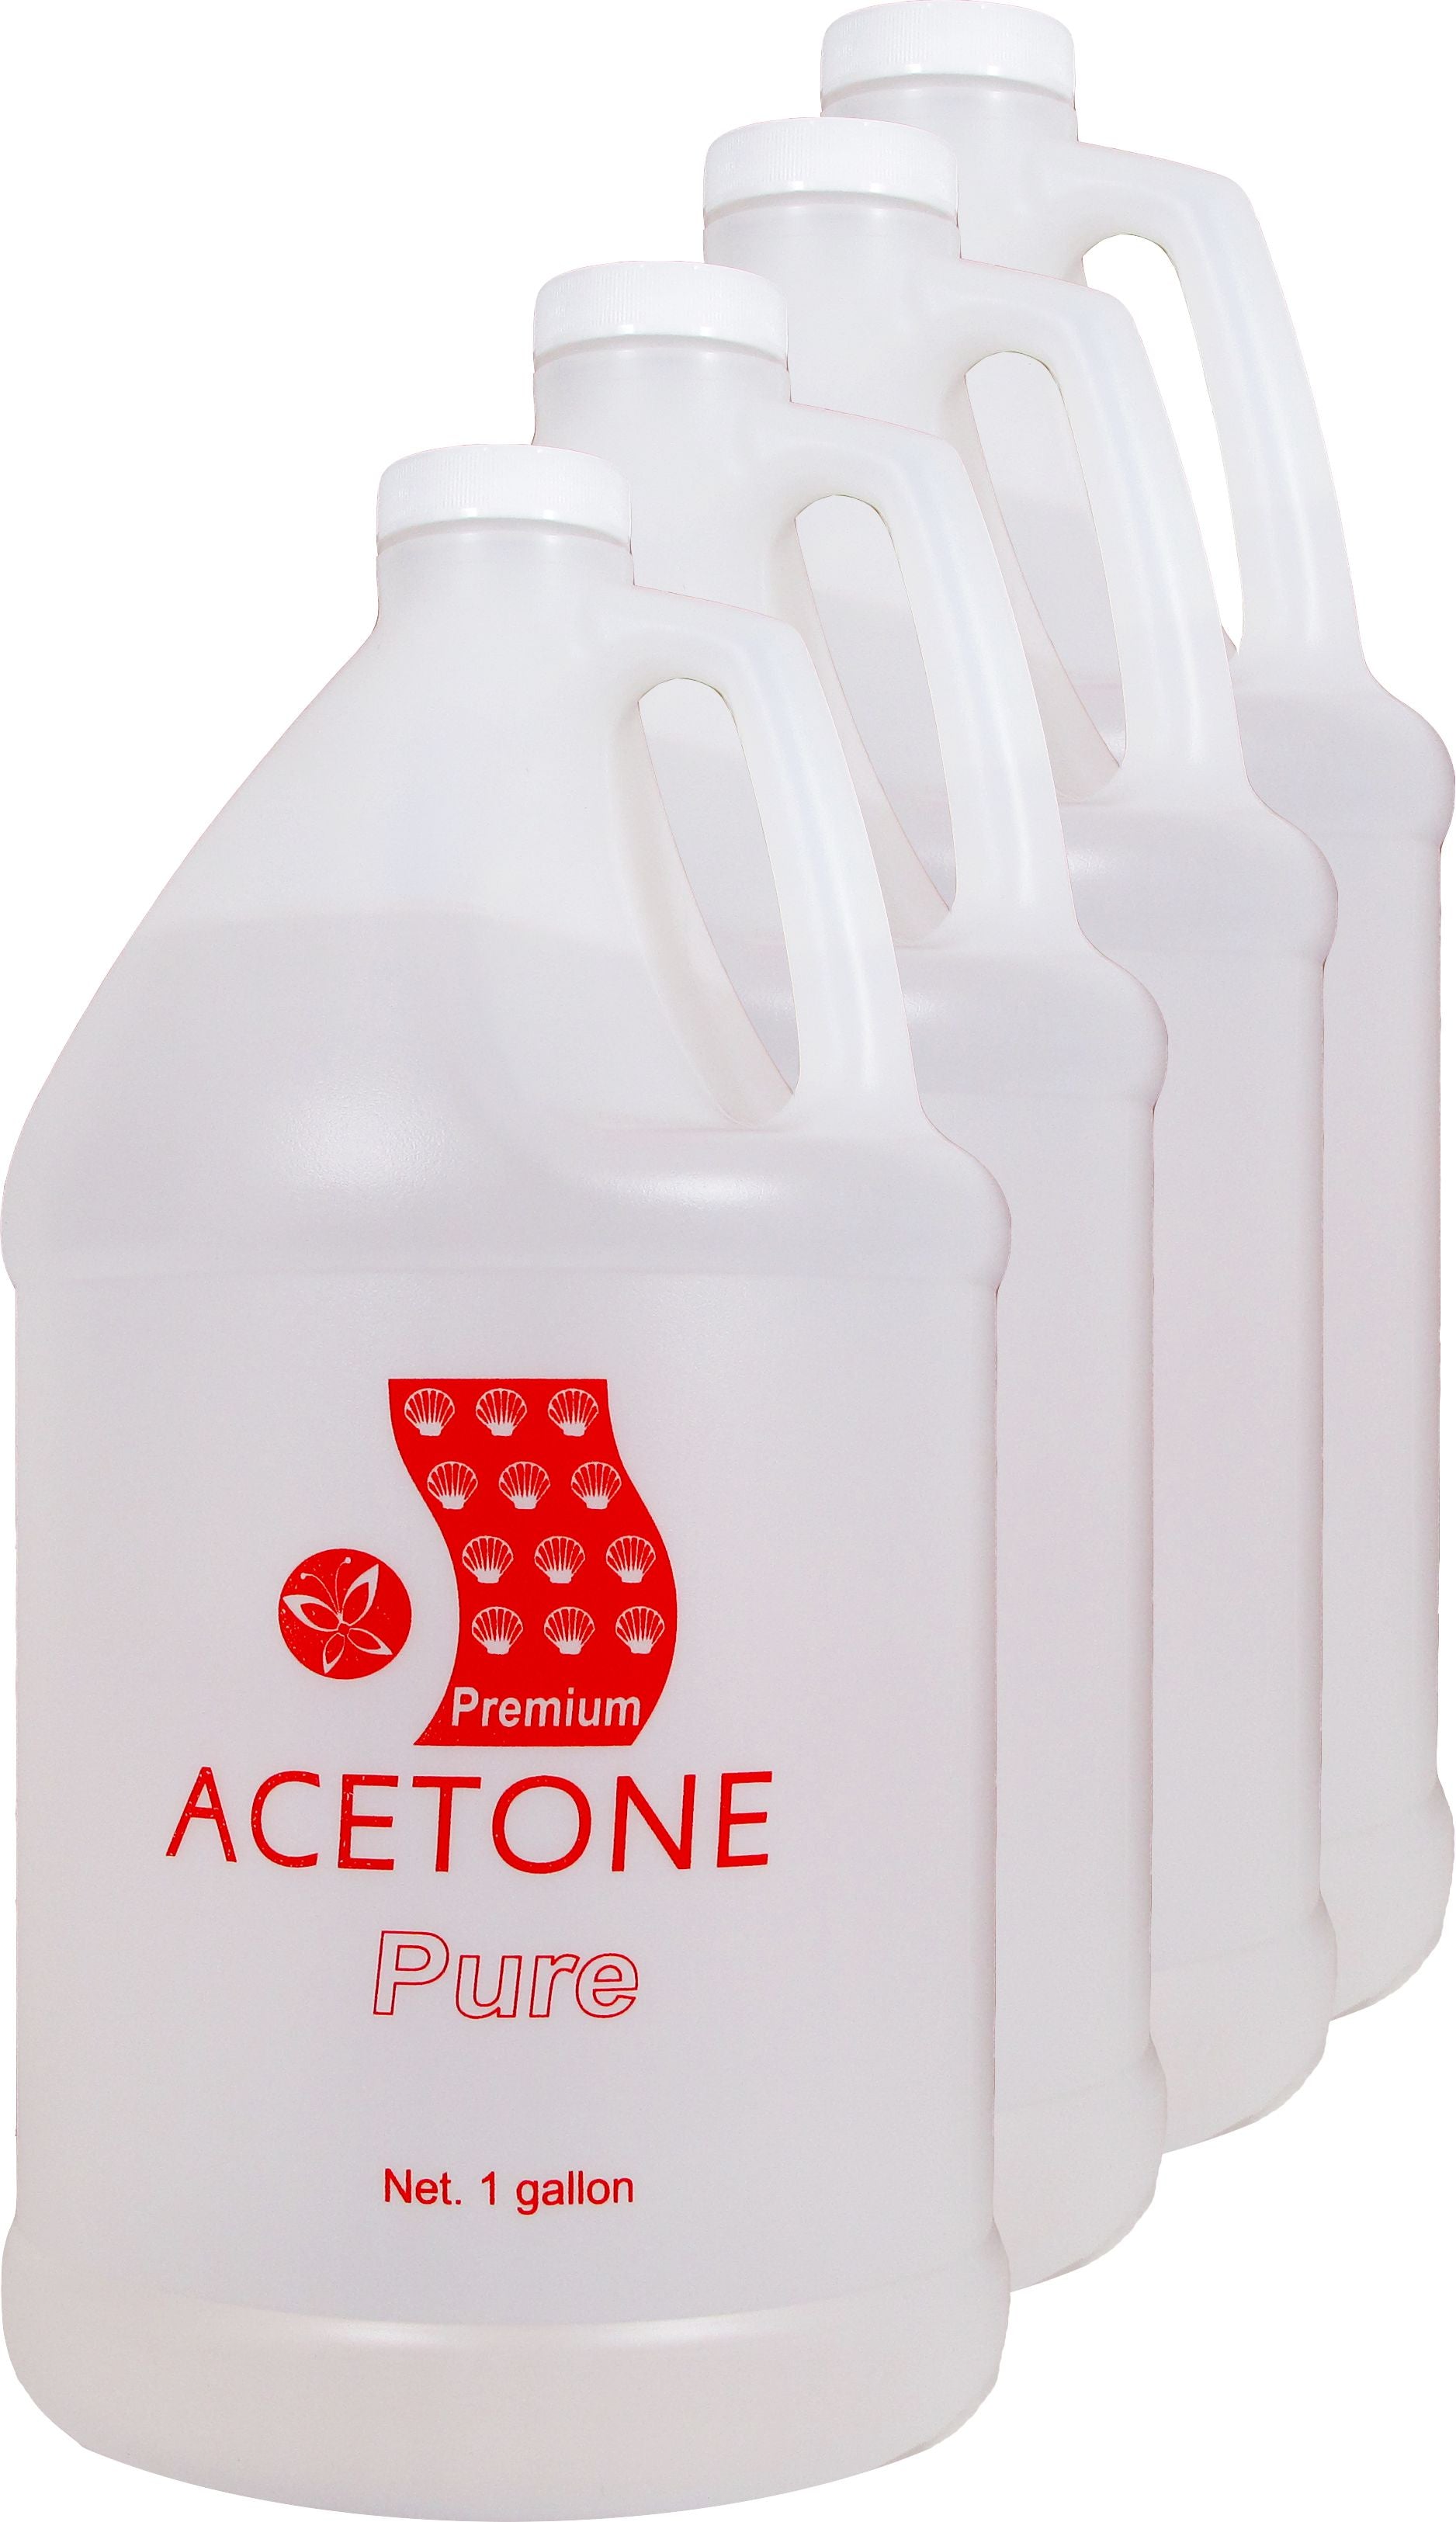 Acetone, Gallon W4601 Painters Pride Products W4601 0